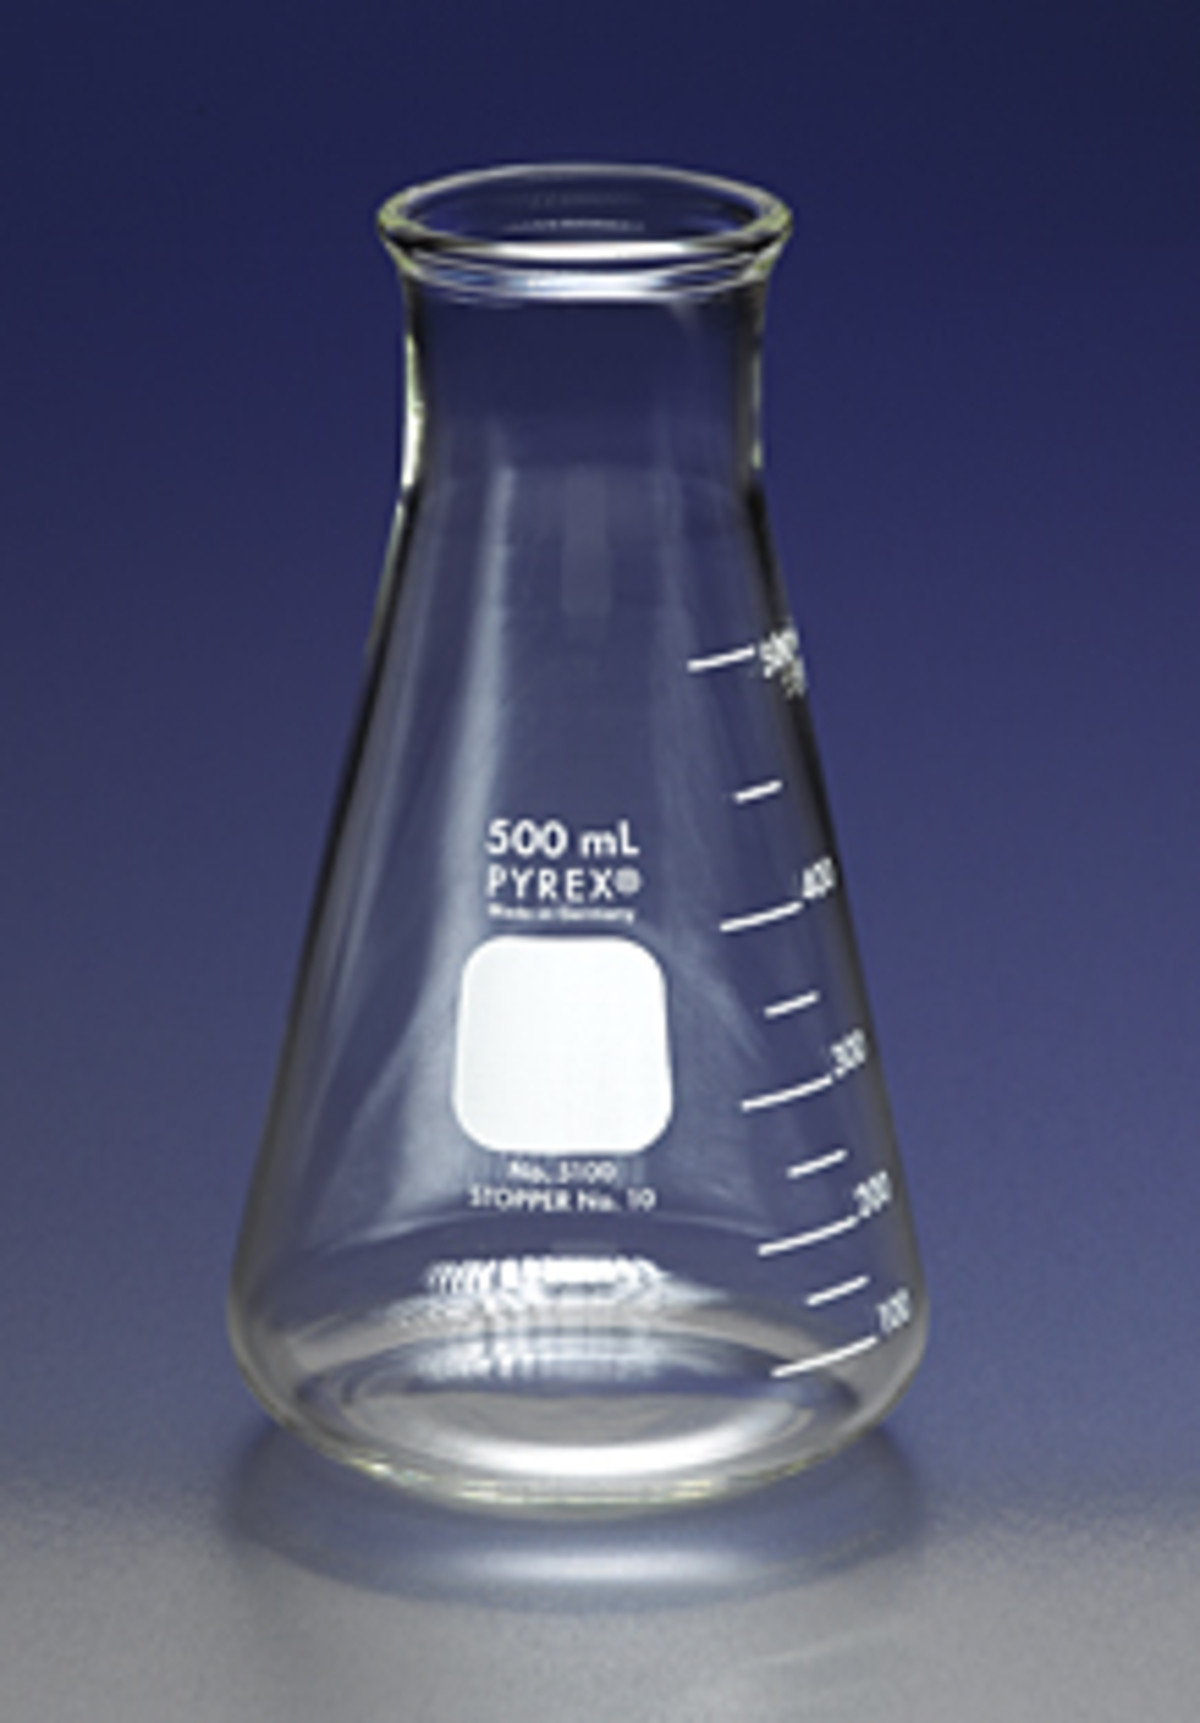 wide mouth glass vases of pyrexa 1l wide mouth erlenmeyer flasks with heavy duty rim 1 l in pyrexa 1l wide mouth erlenmeyer flasks with heavy duty rim